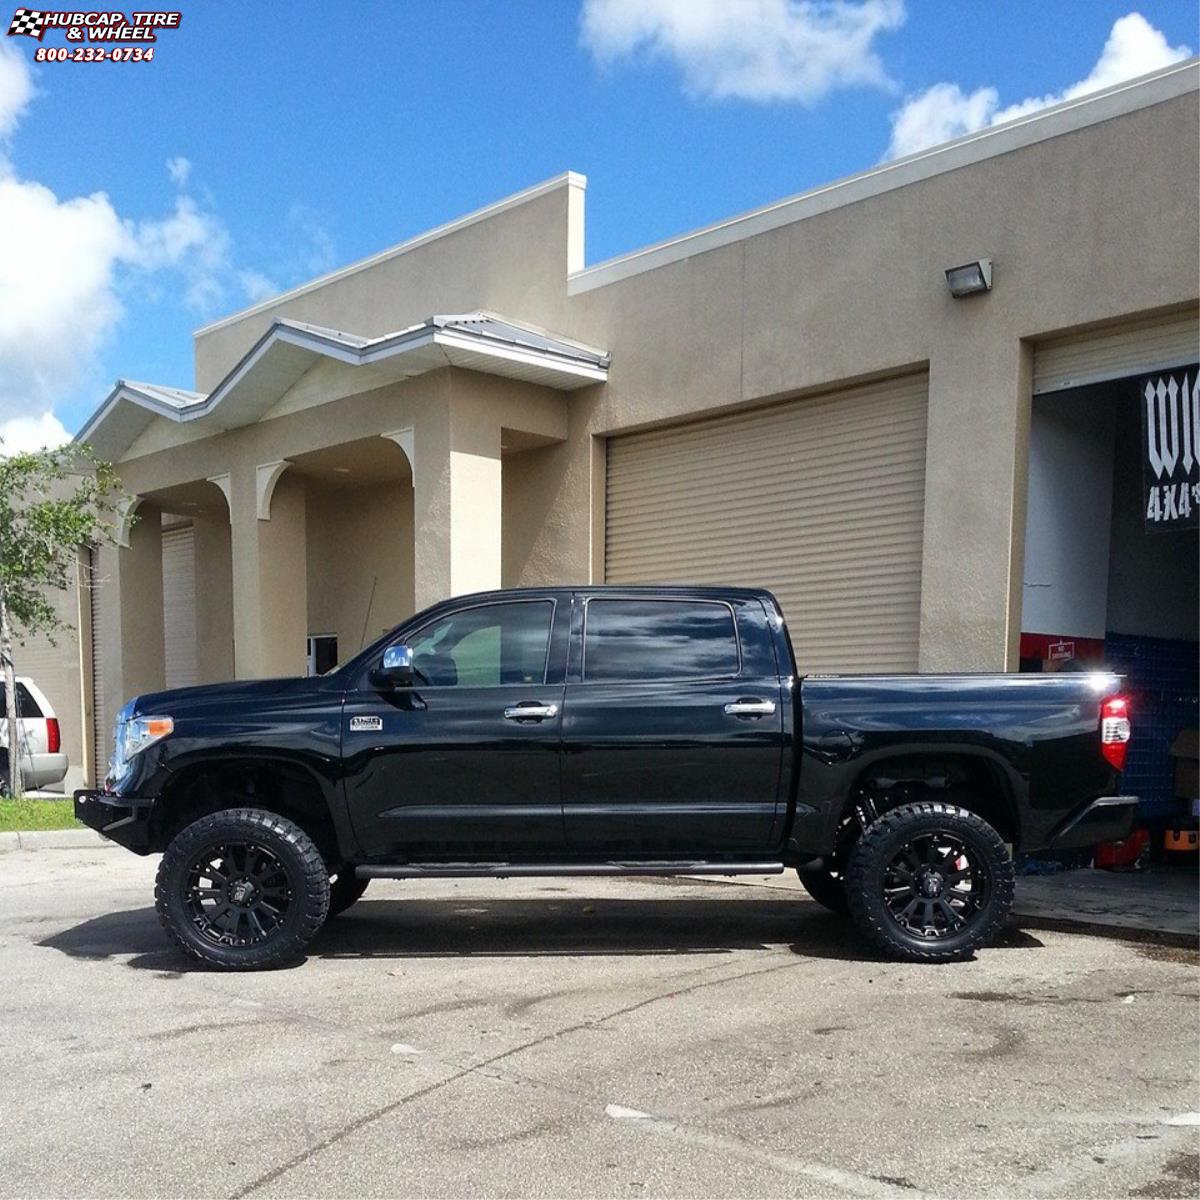 vehicle gallery/2016 toyota tundra xd series xd800 misfit  Matte Black wheels and rims